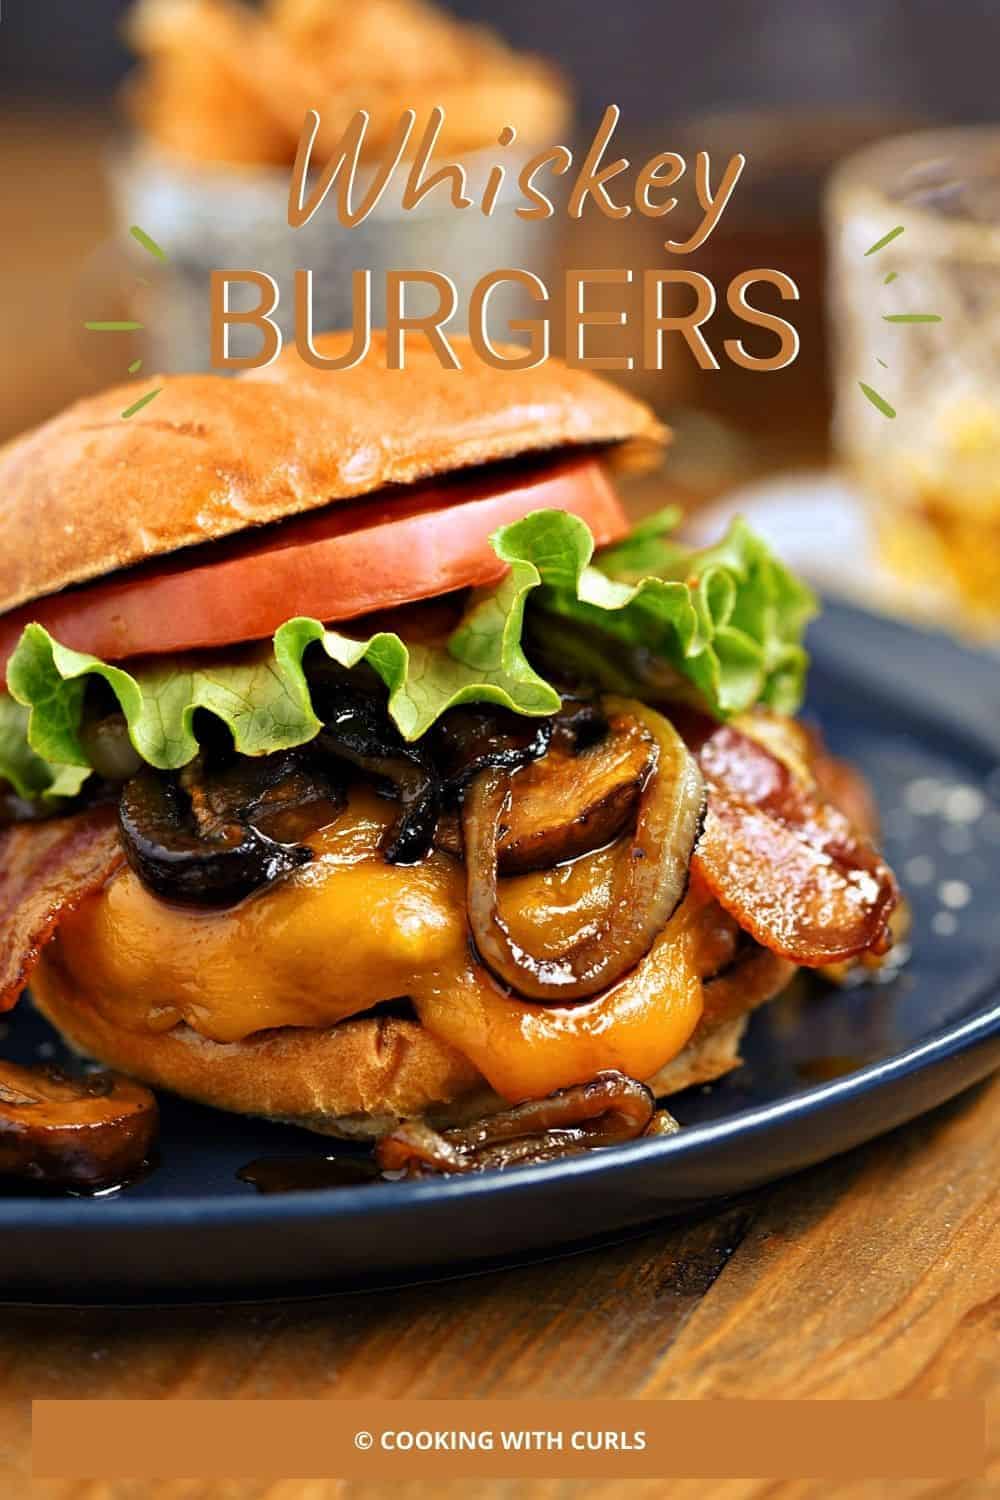 Whiskey Burgers - Cooking with Curls